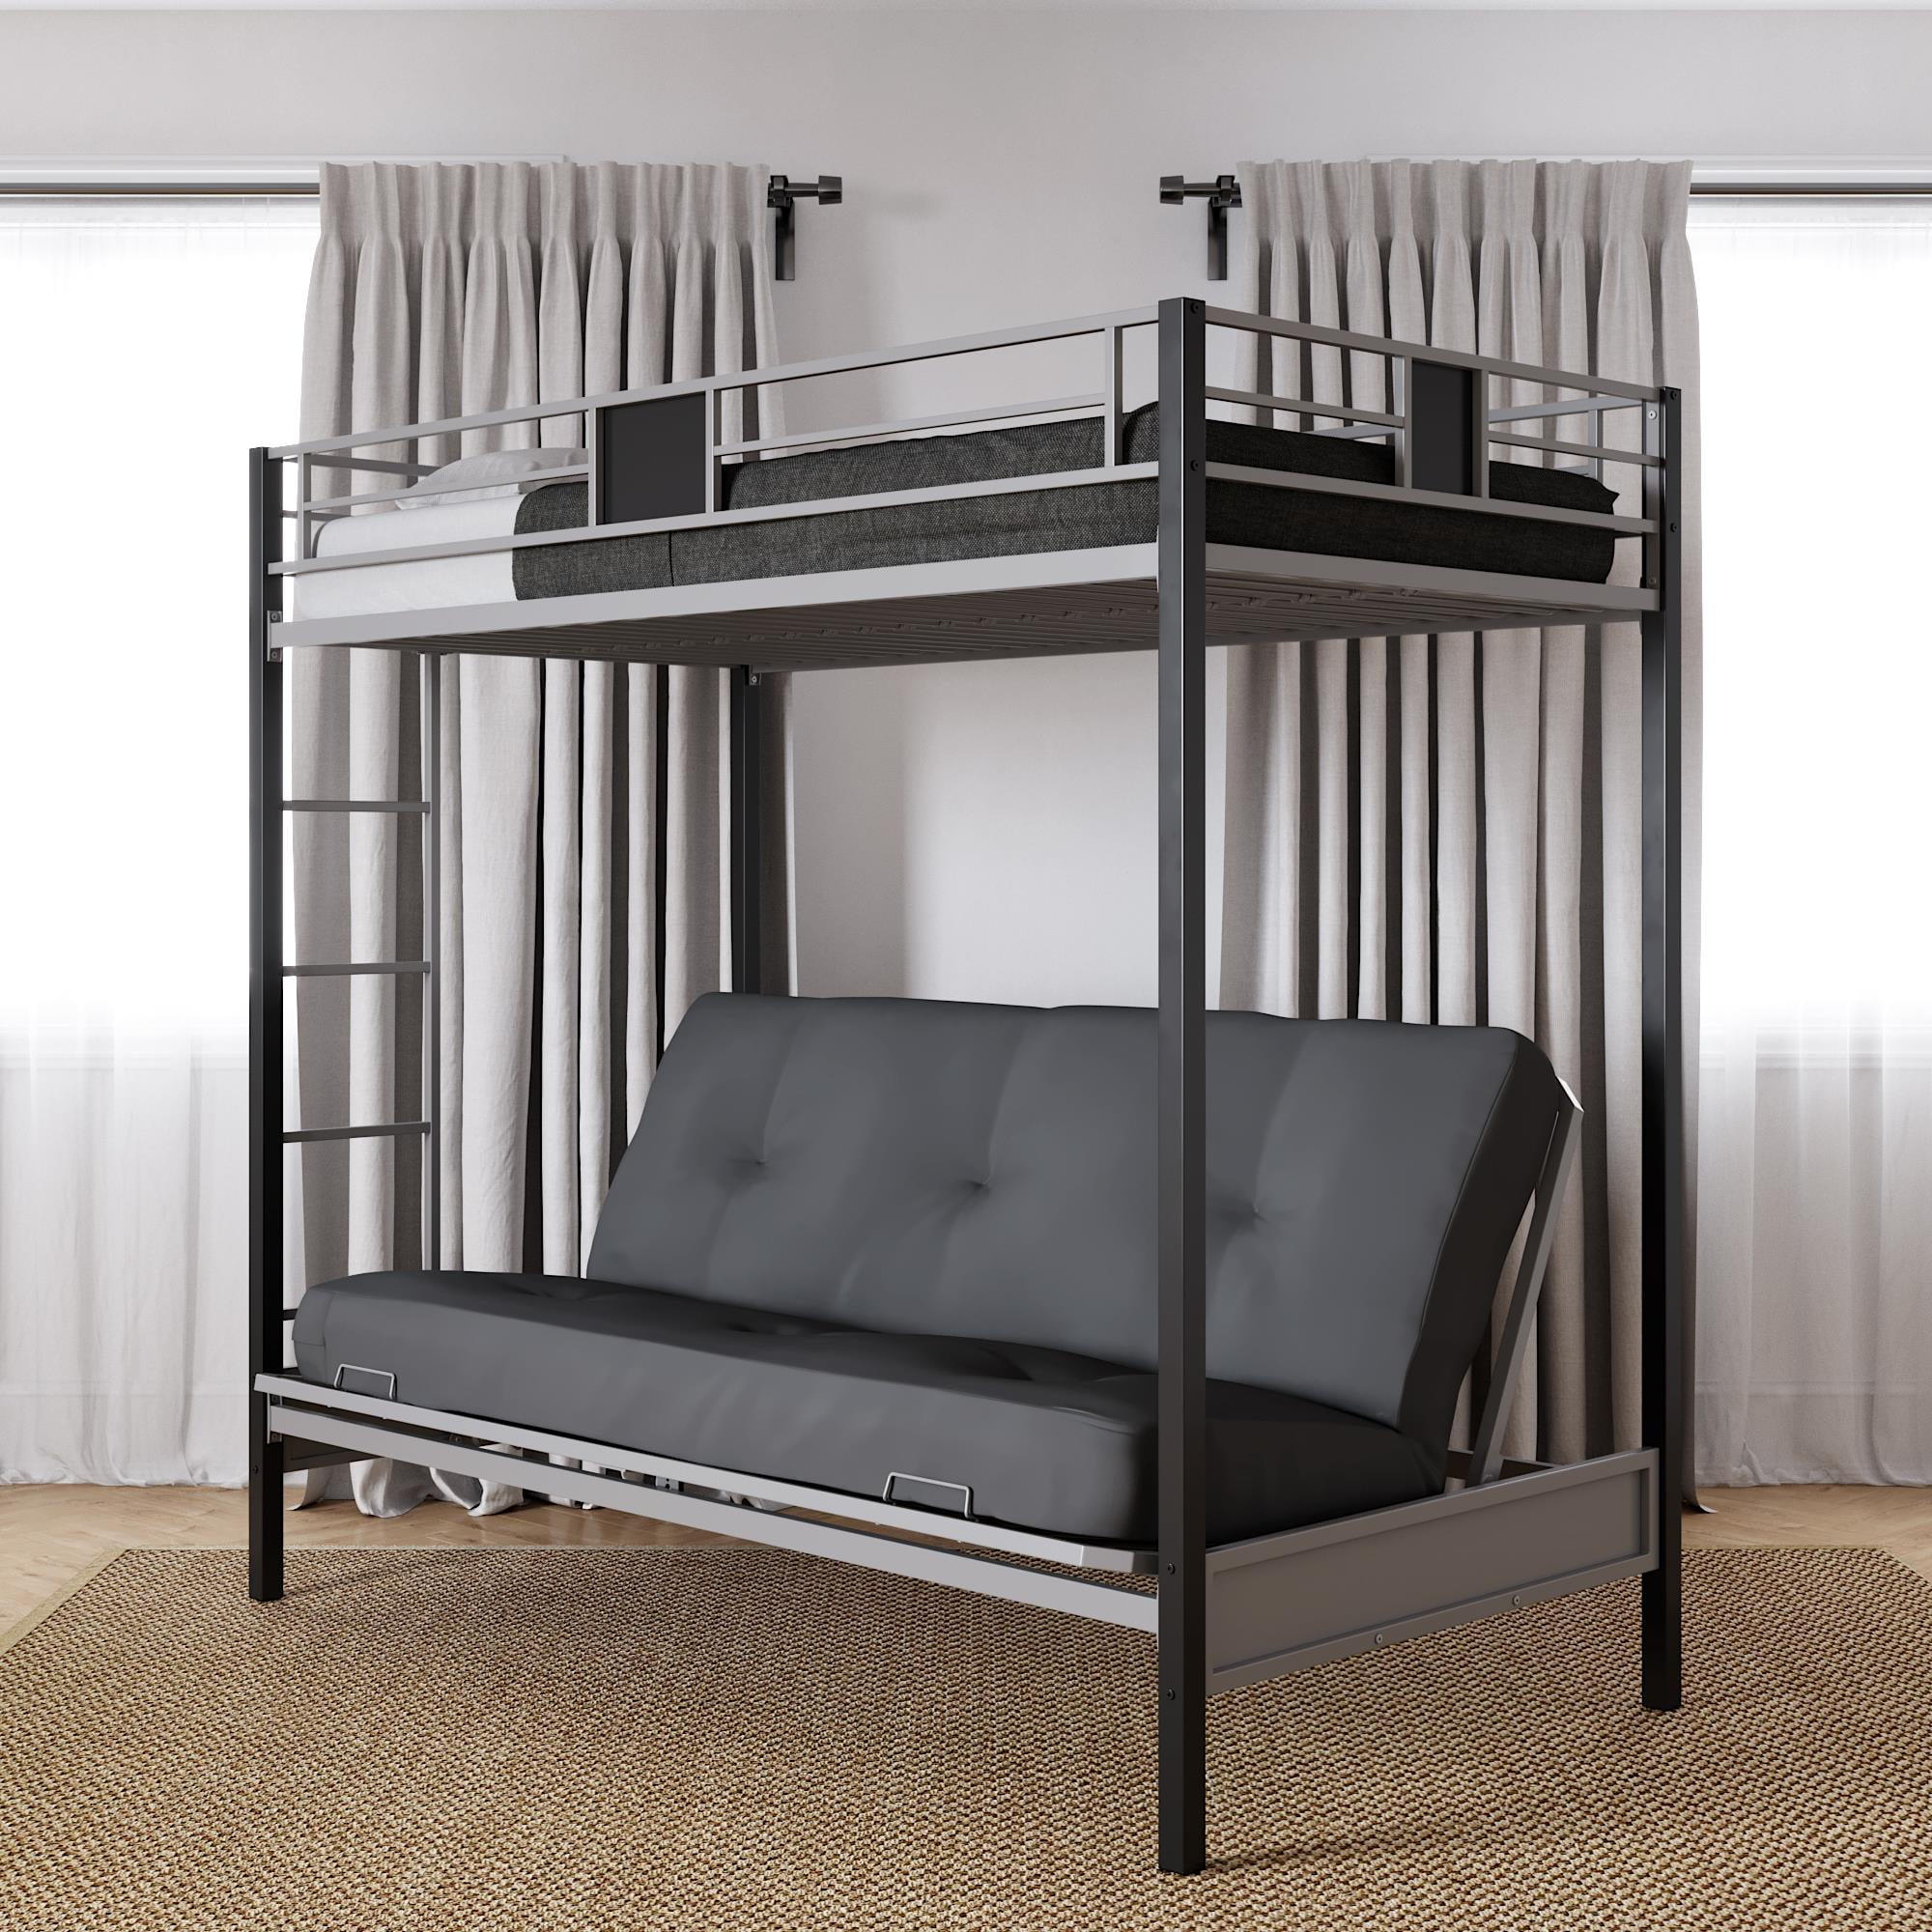 Mainstays Small Space Junior Twin Over, Sam’s Club Bunk Beds